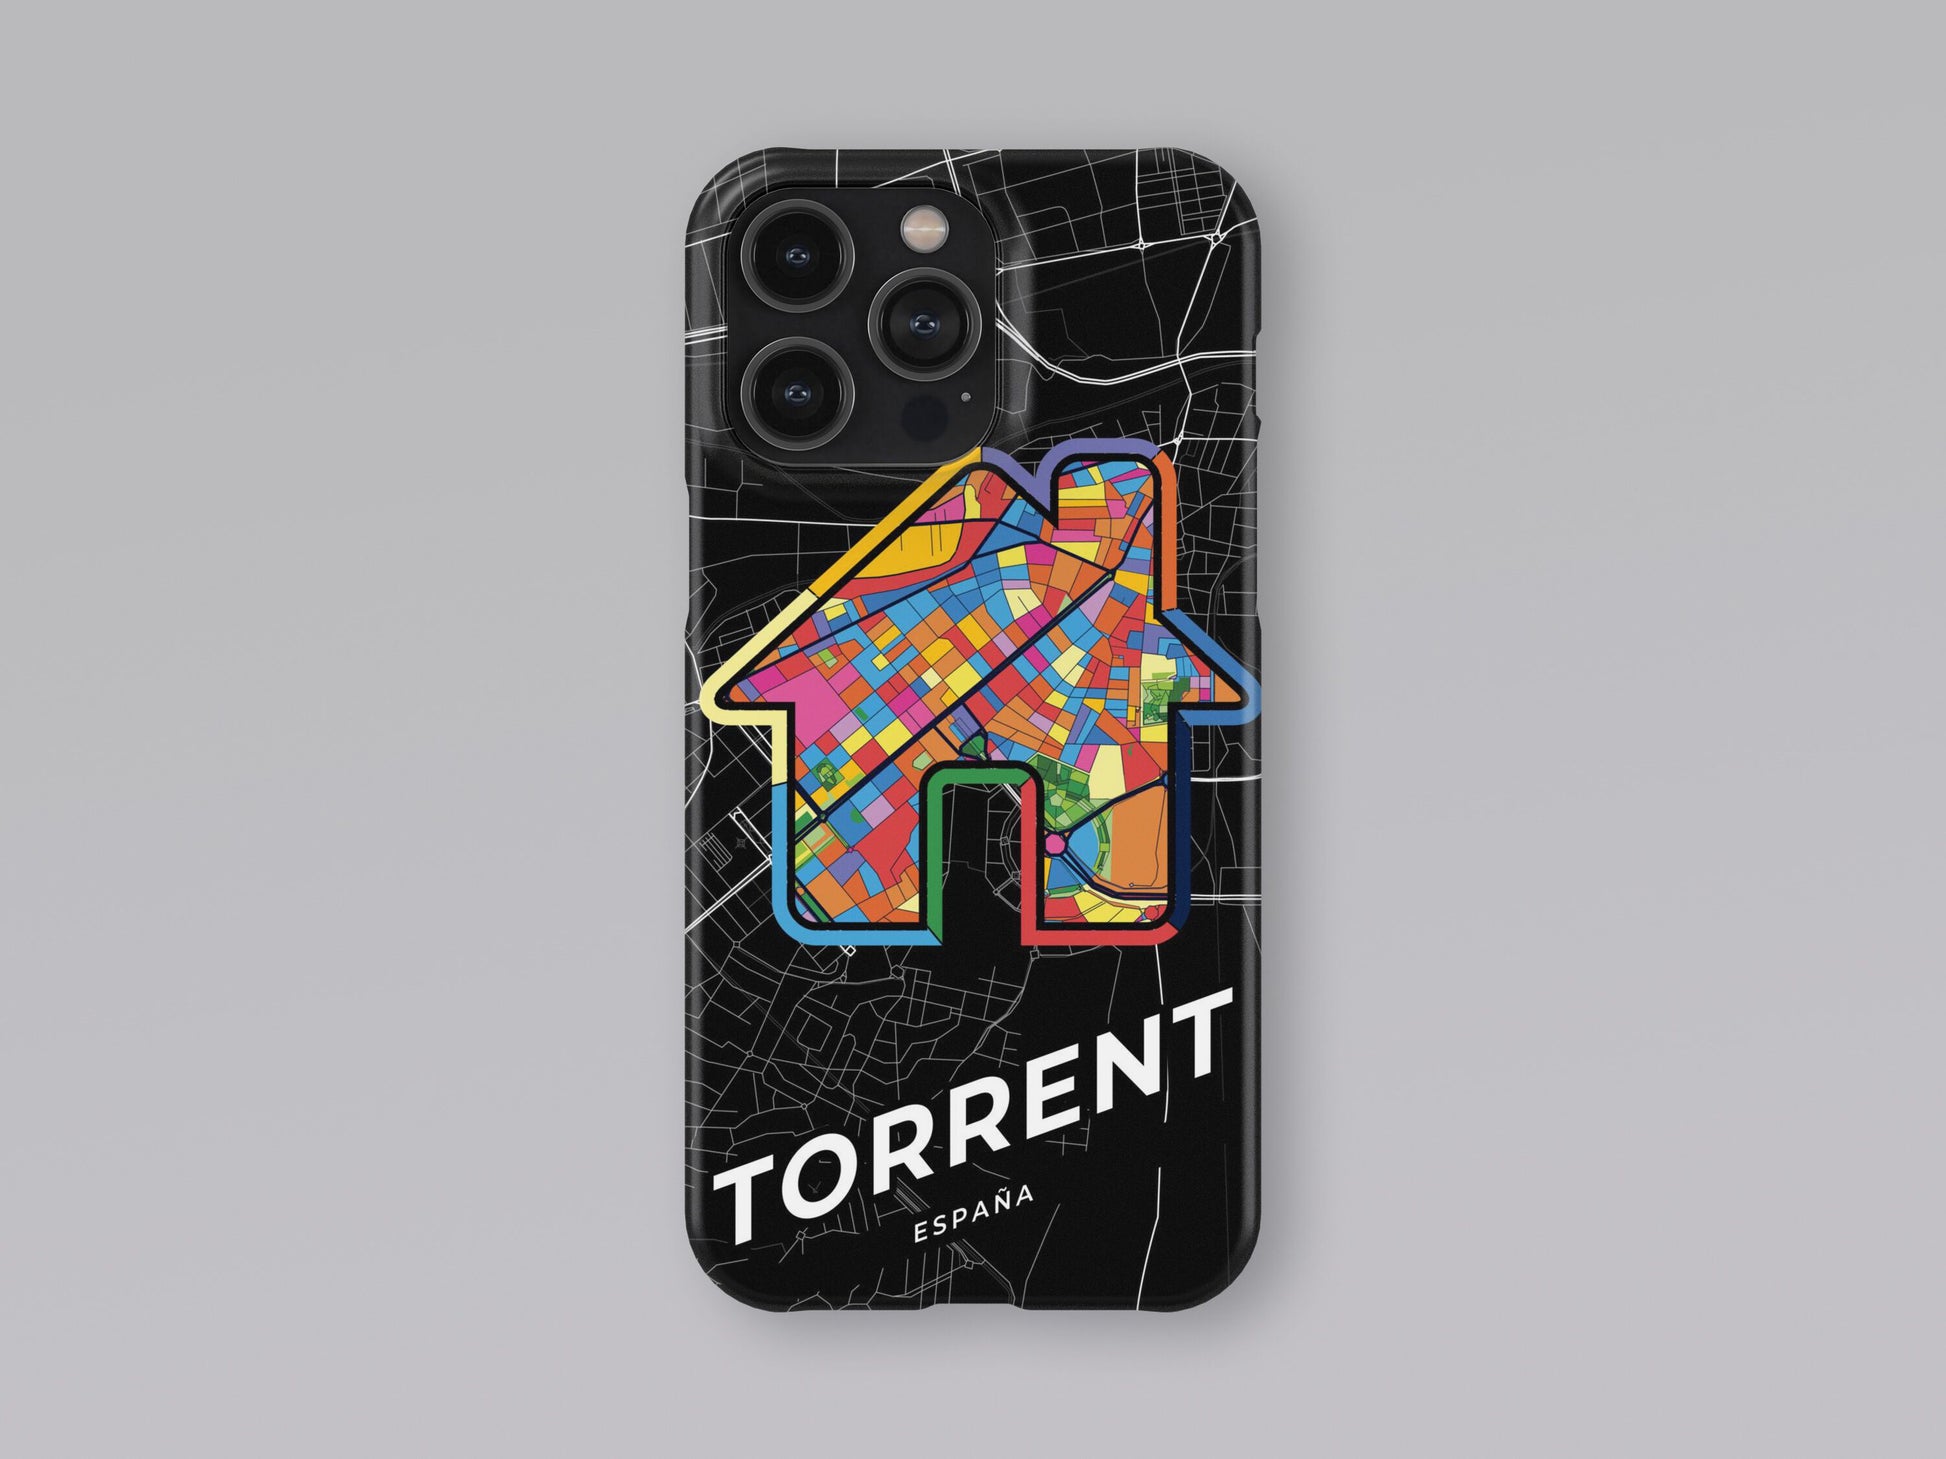 Torrent Spain slim phone case with colorful icon 3